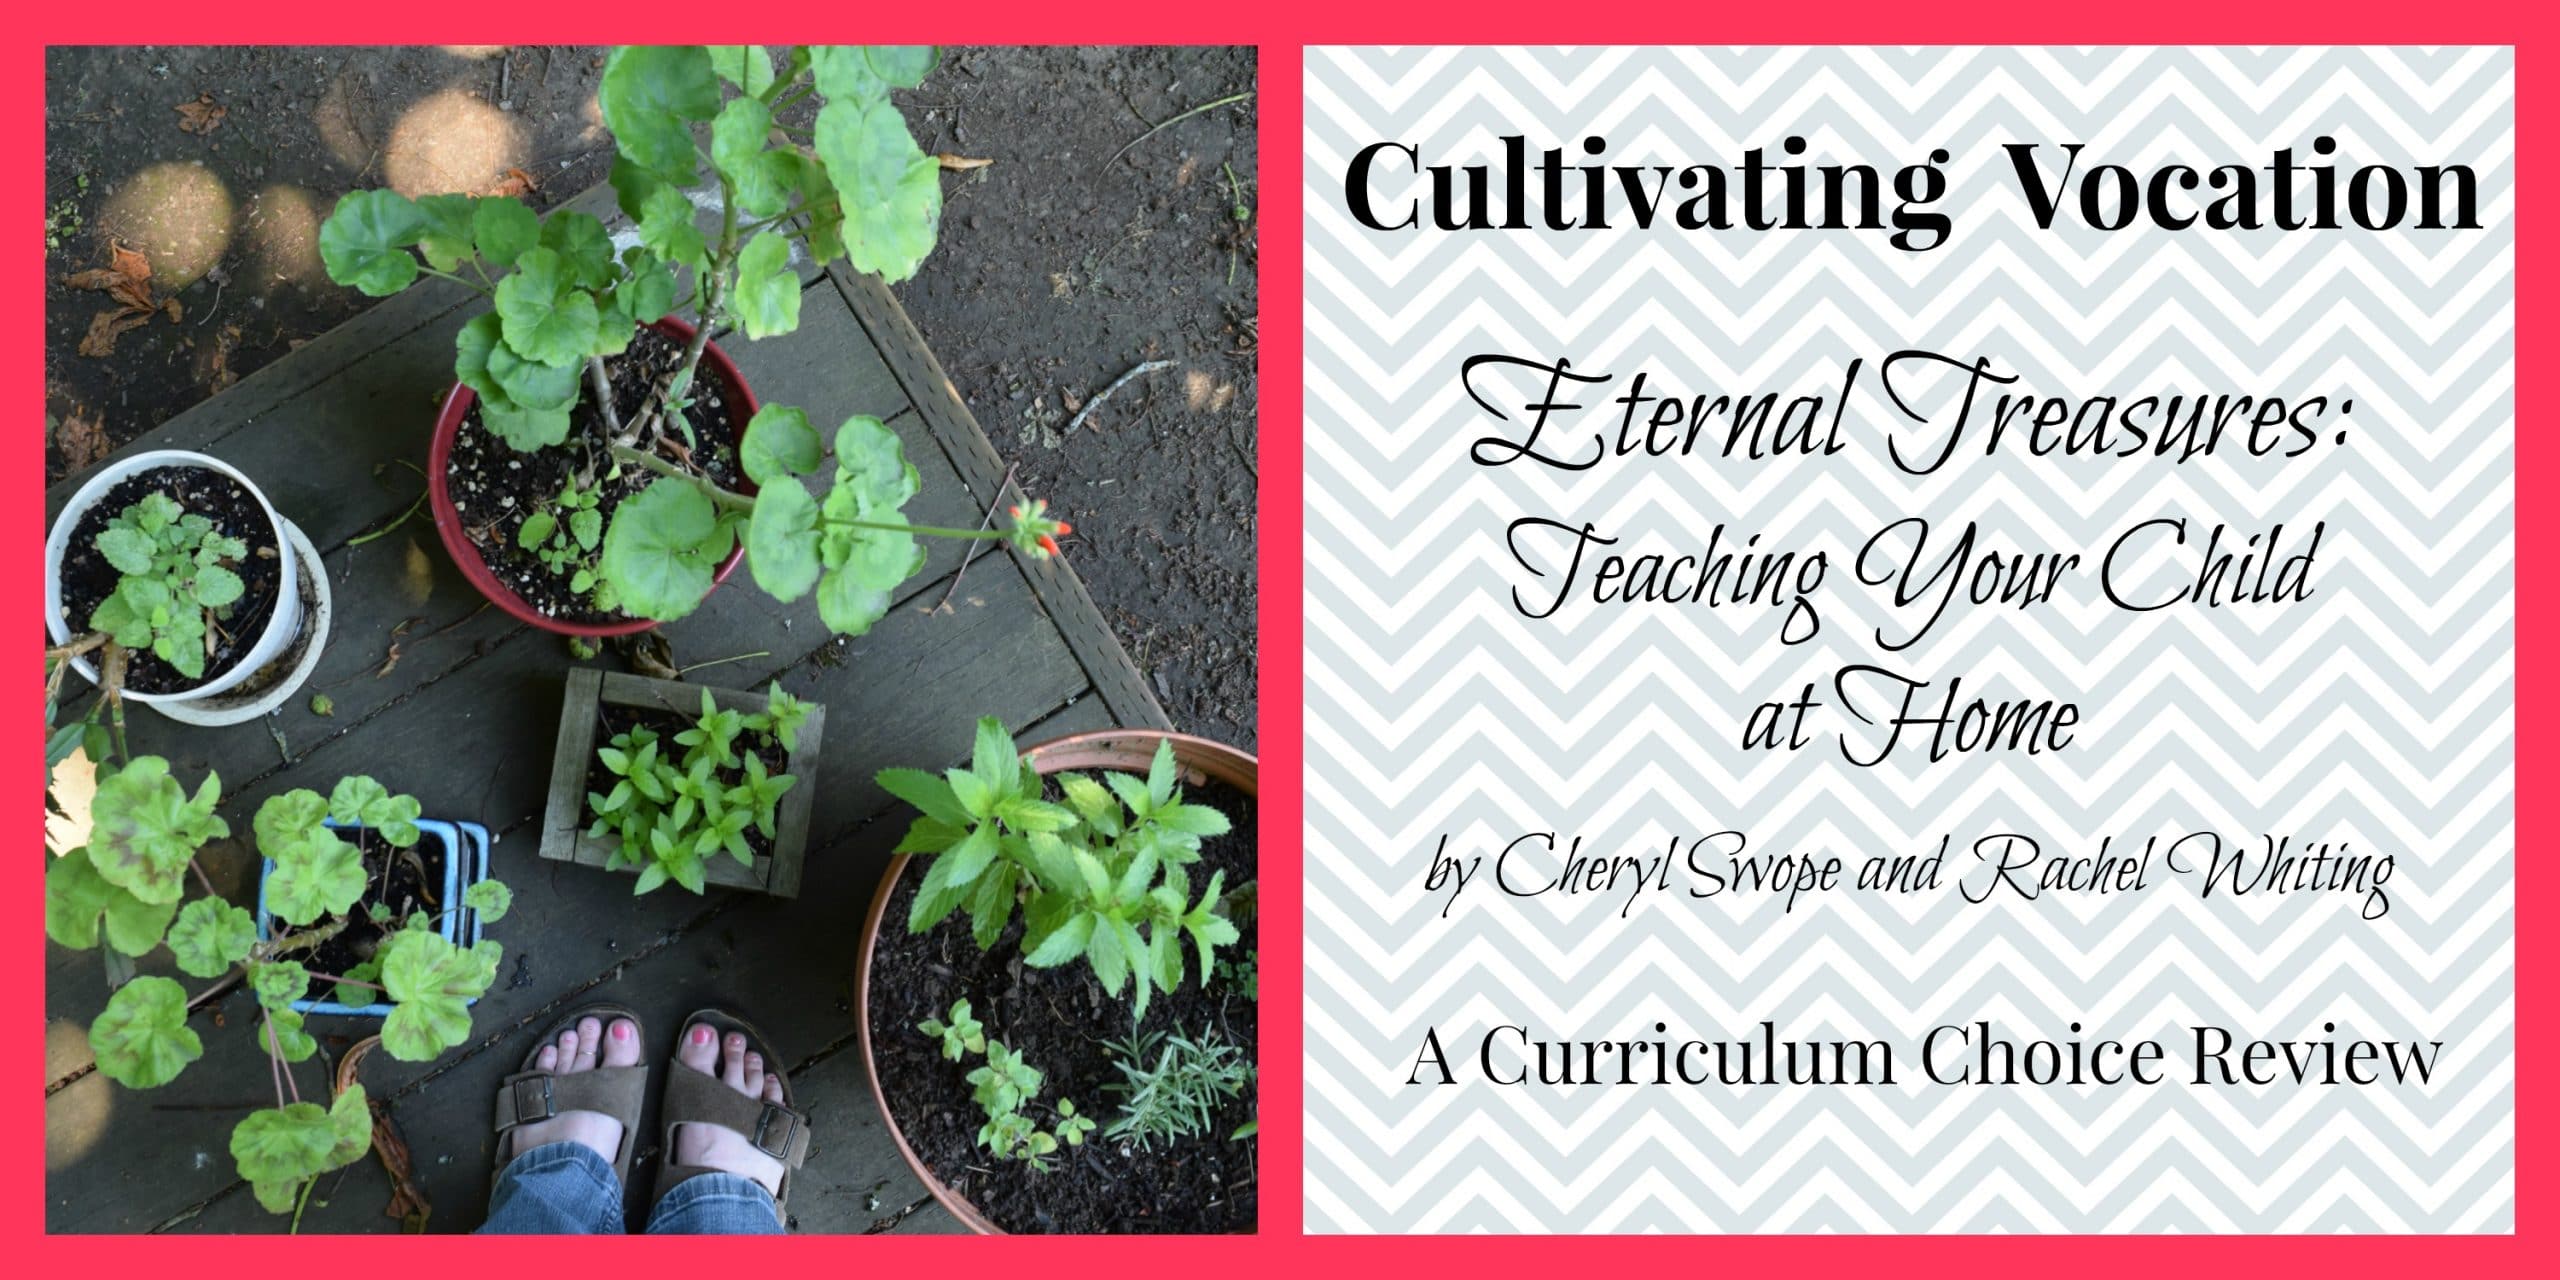 Cultivating Vocation with Cheryl Swope’s Eternal Treasures